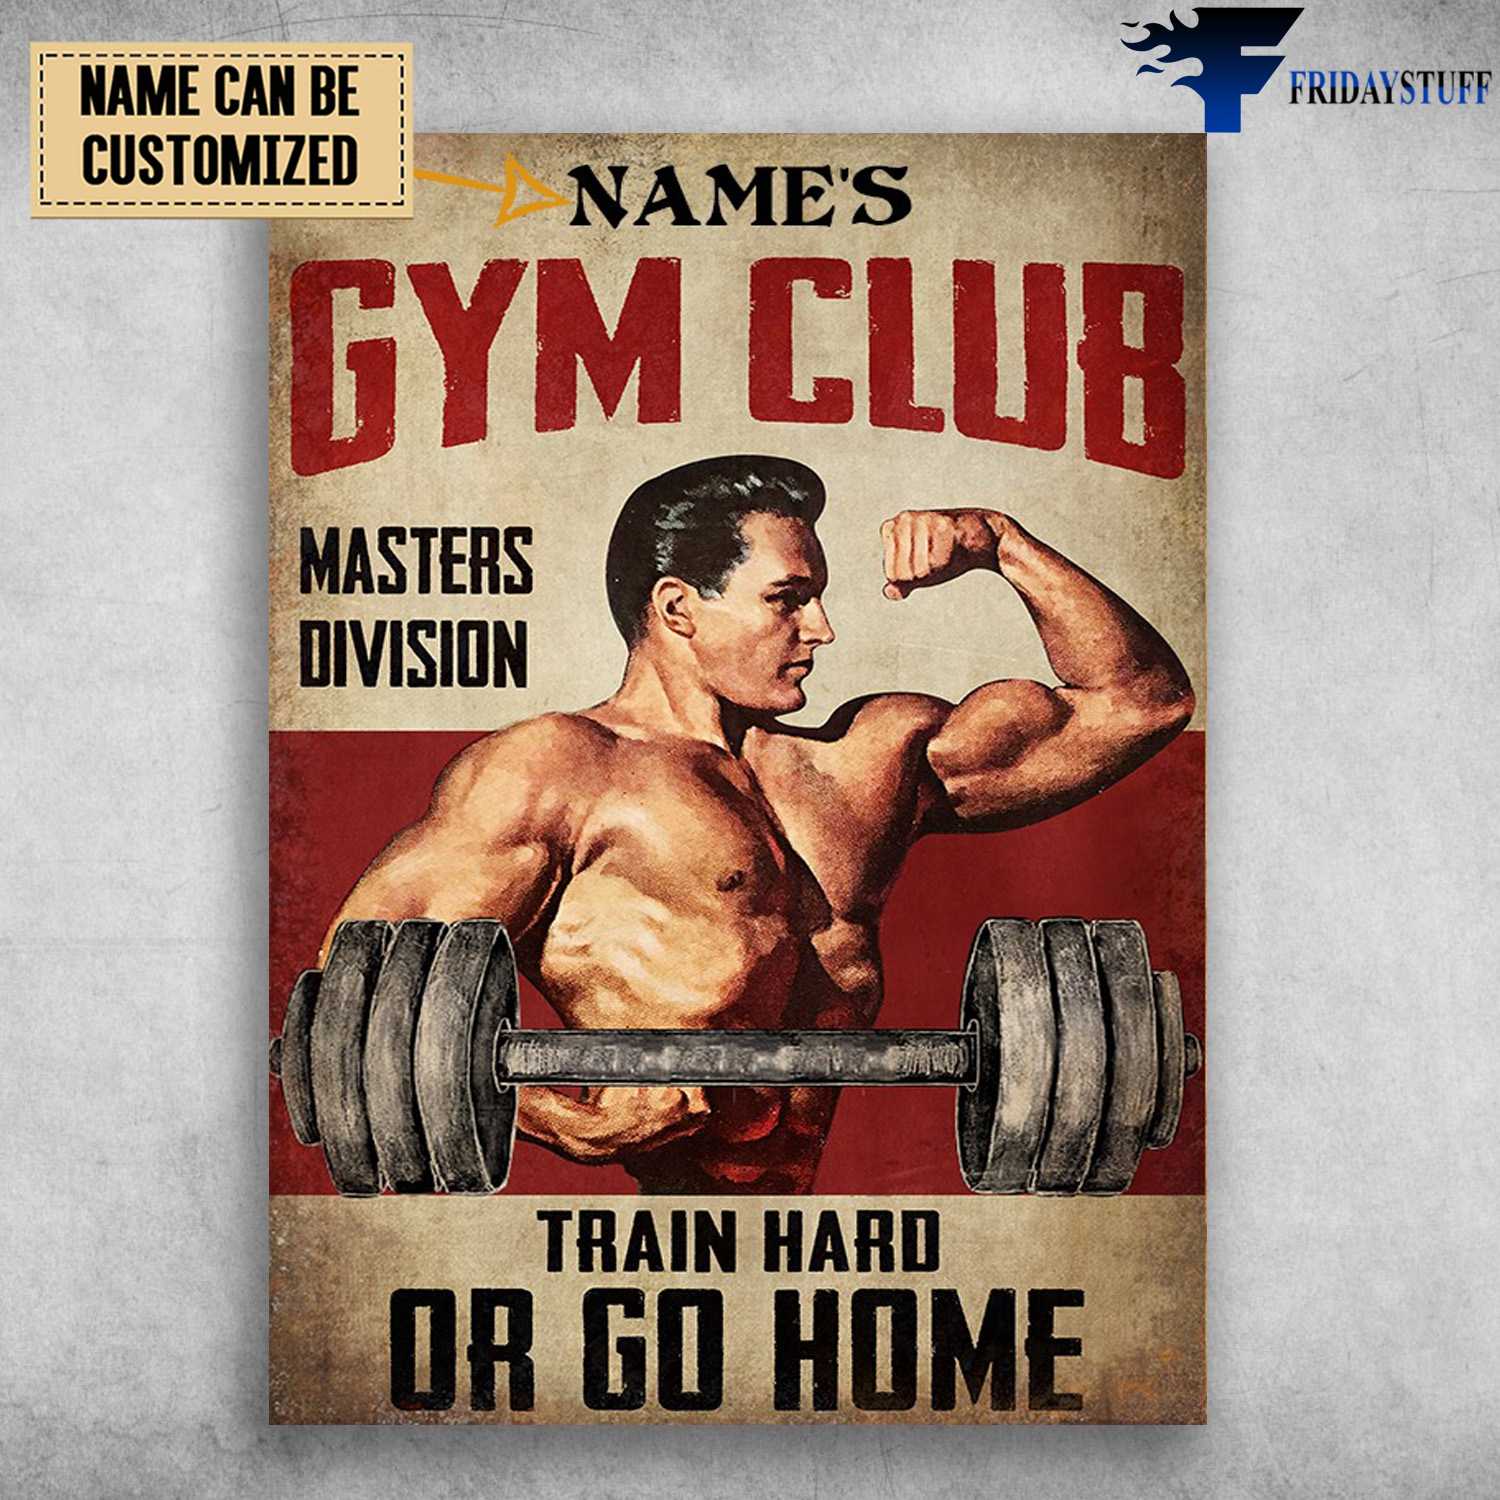 Weightlifting Man, Gym Lover, Gym Club, Masters Division, Train Hard Or Go Home